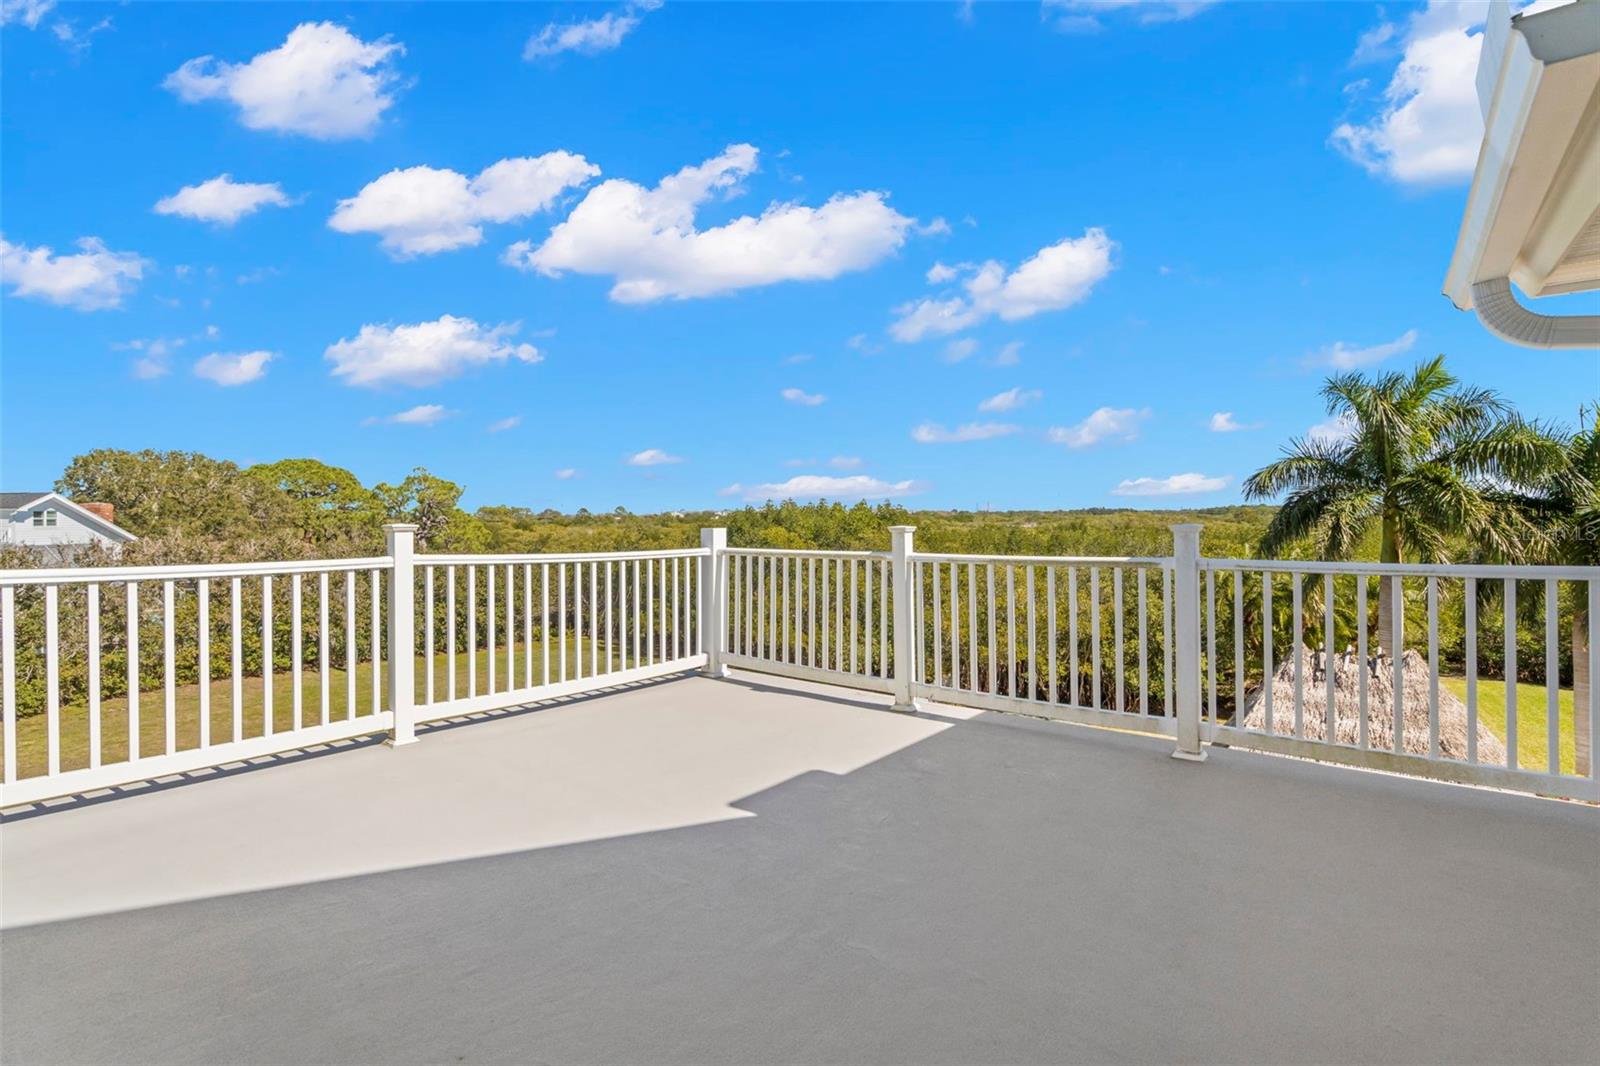 3rd Floor Balcony offers sweeping view of Bayou.